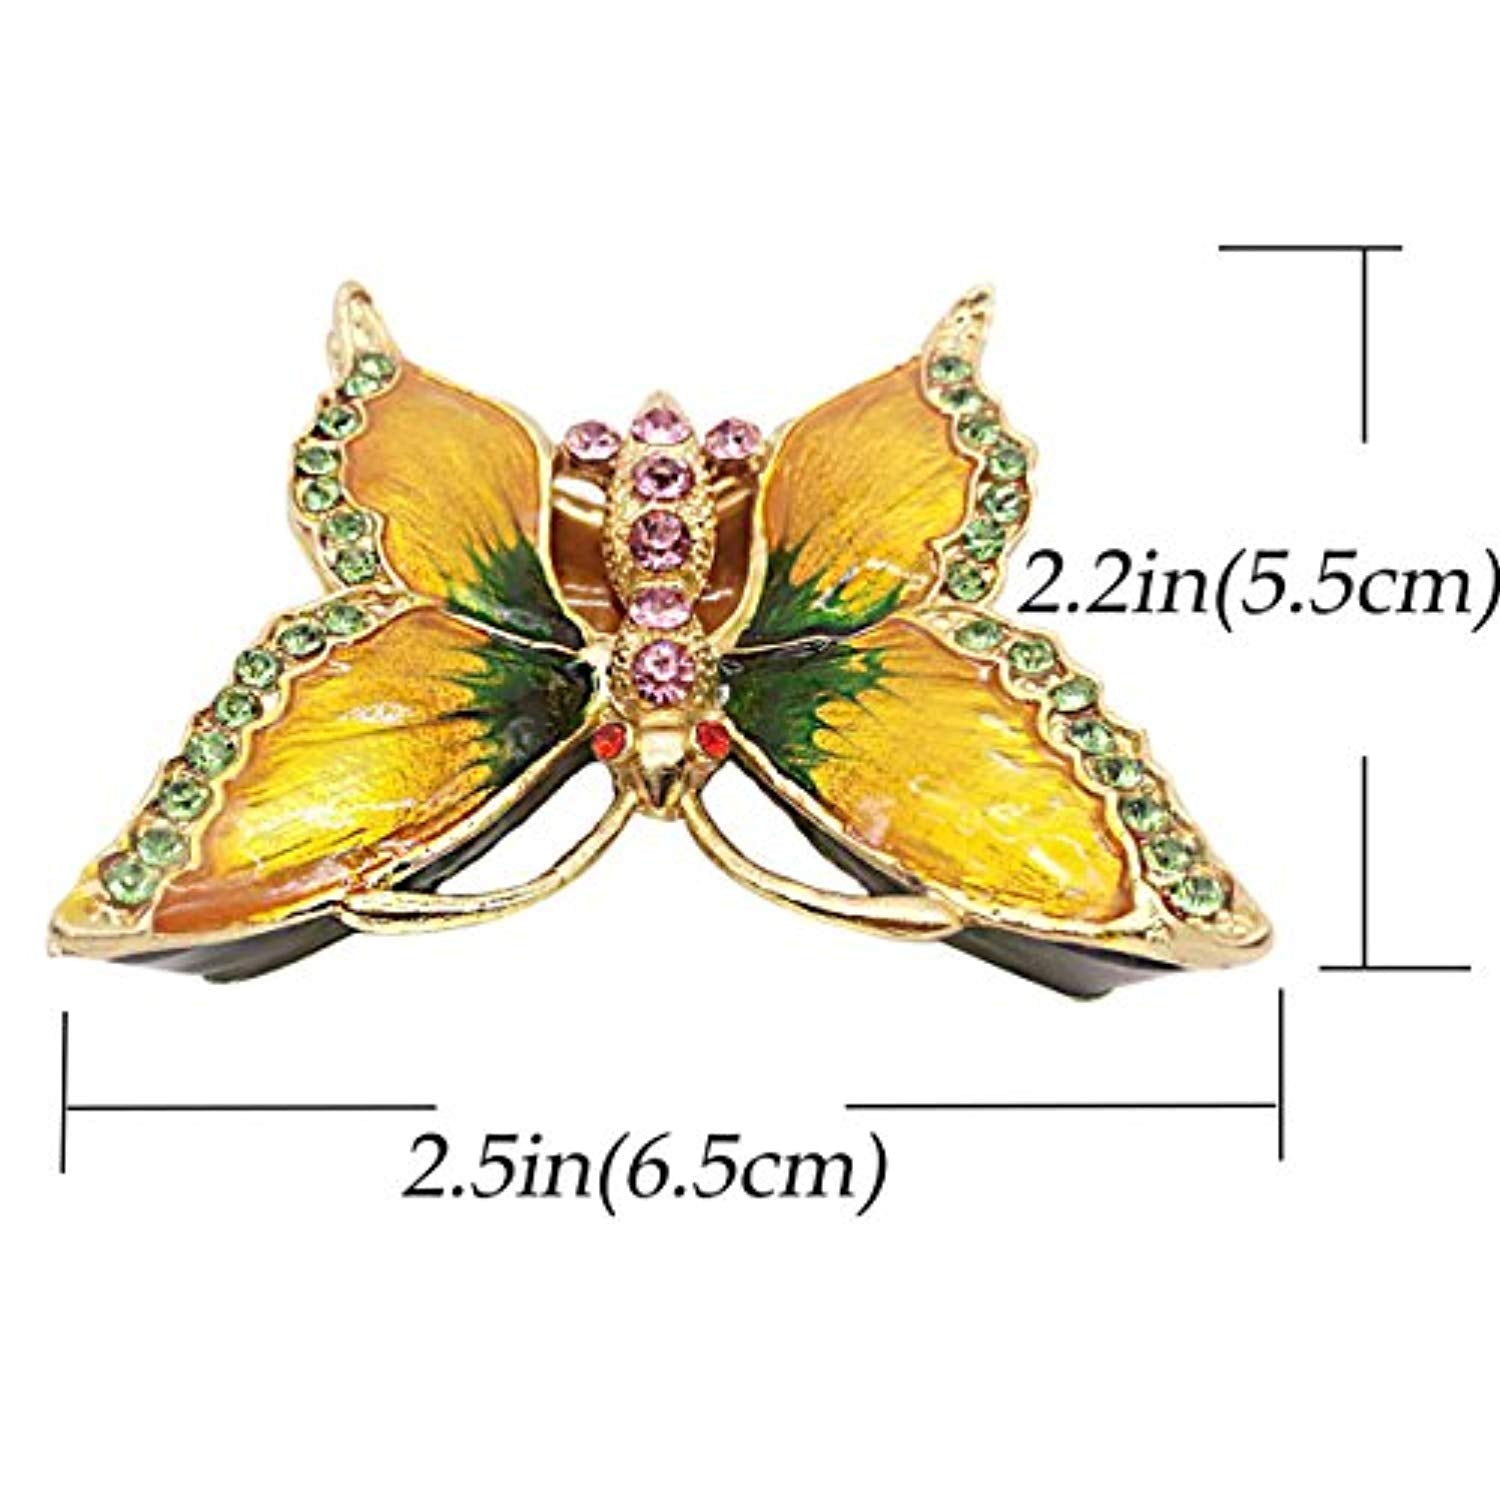 Butterfly Trinket Box Bejeweled Animal Figurine Collectible Ring Holde